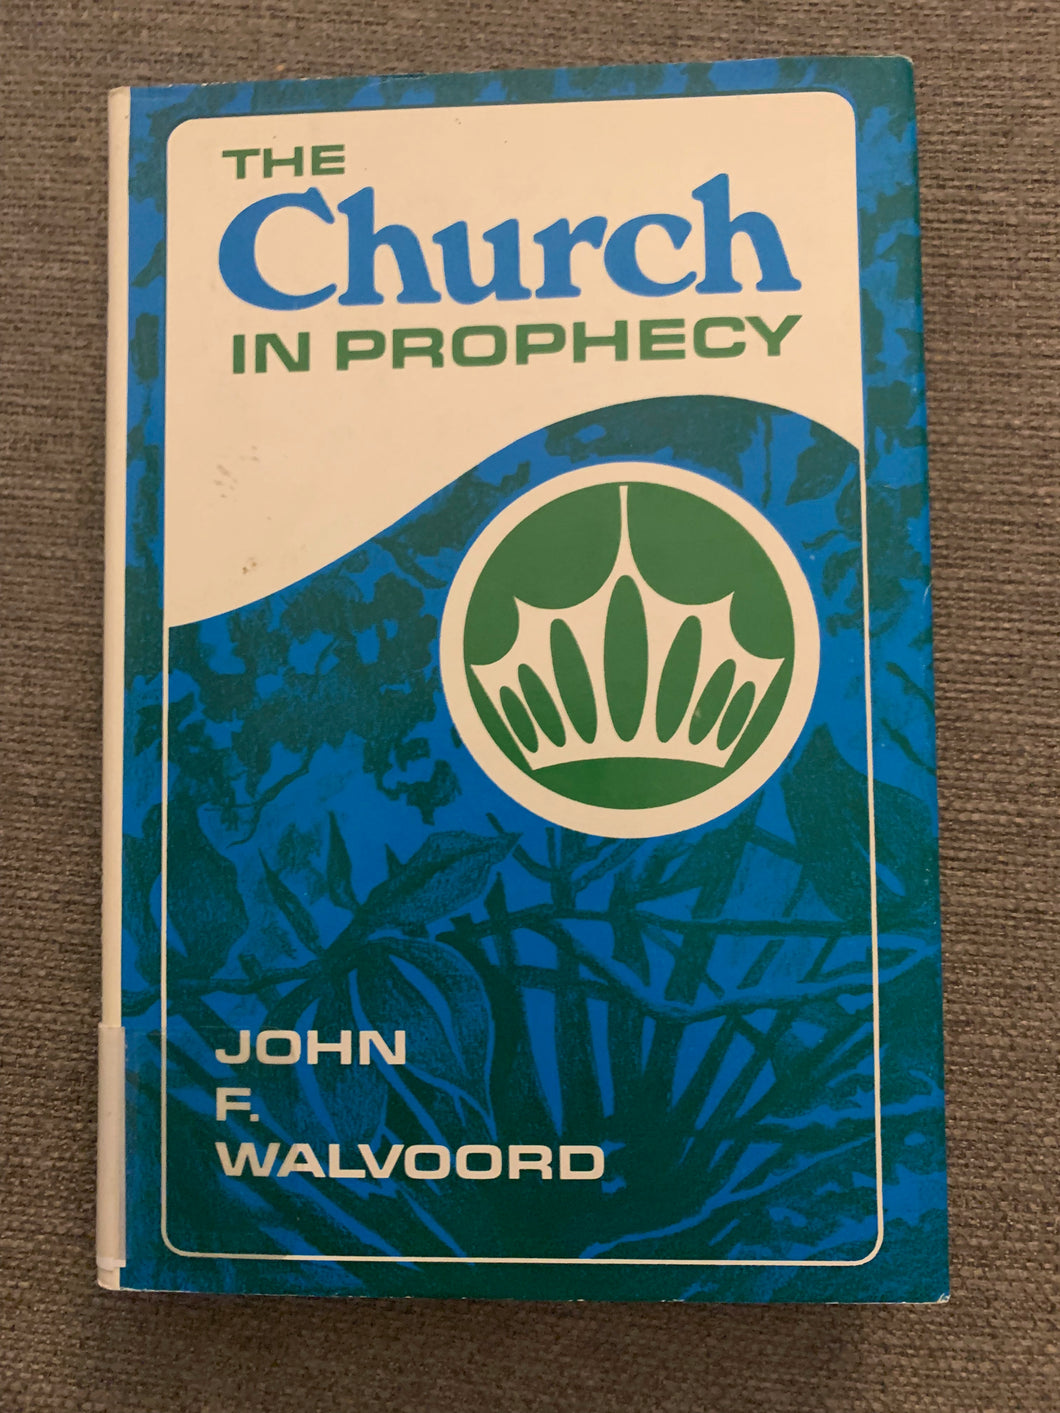 The Church in Prophecy by John F. Walvoord